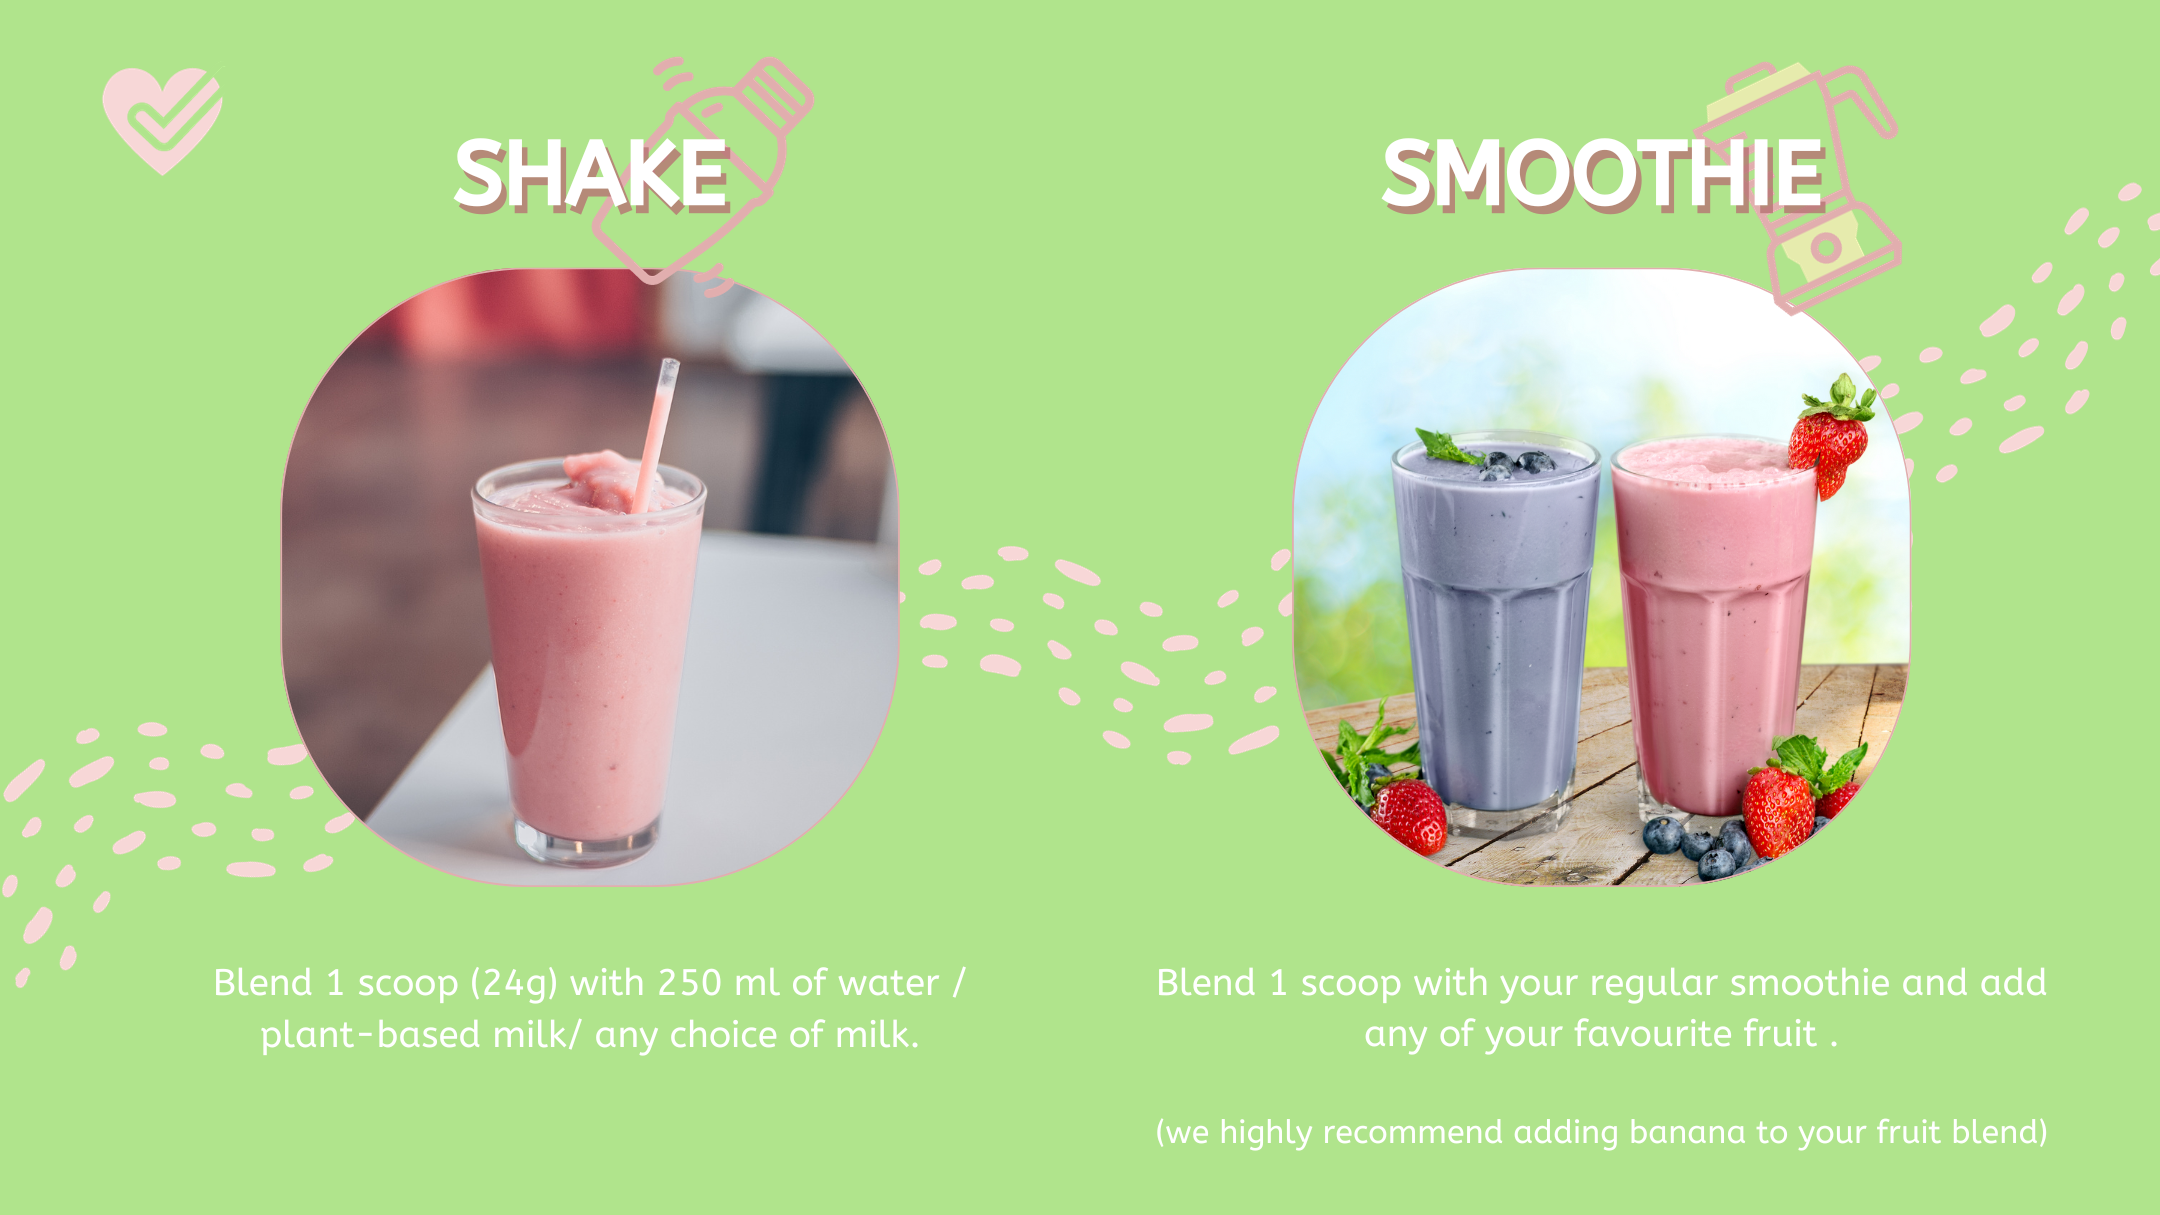 You can enjoy our delicious WishFit Plant Protein in 2 easy ways!